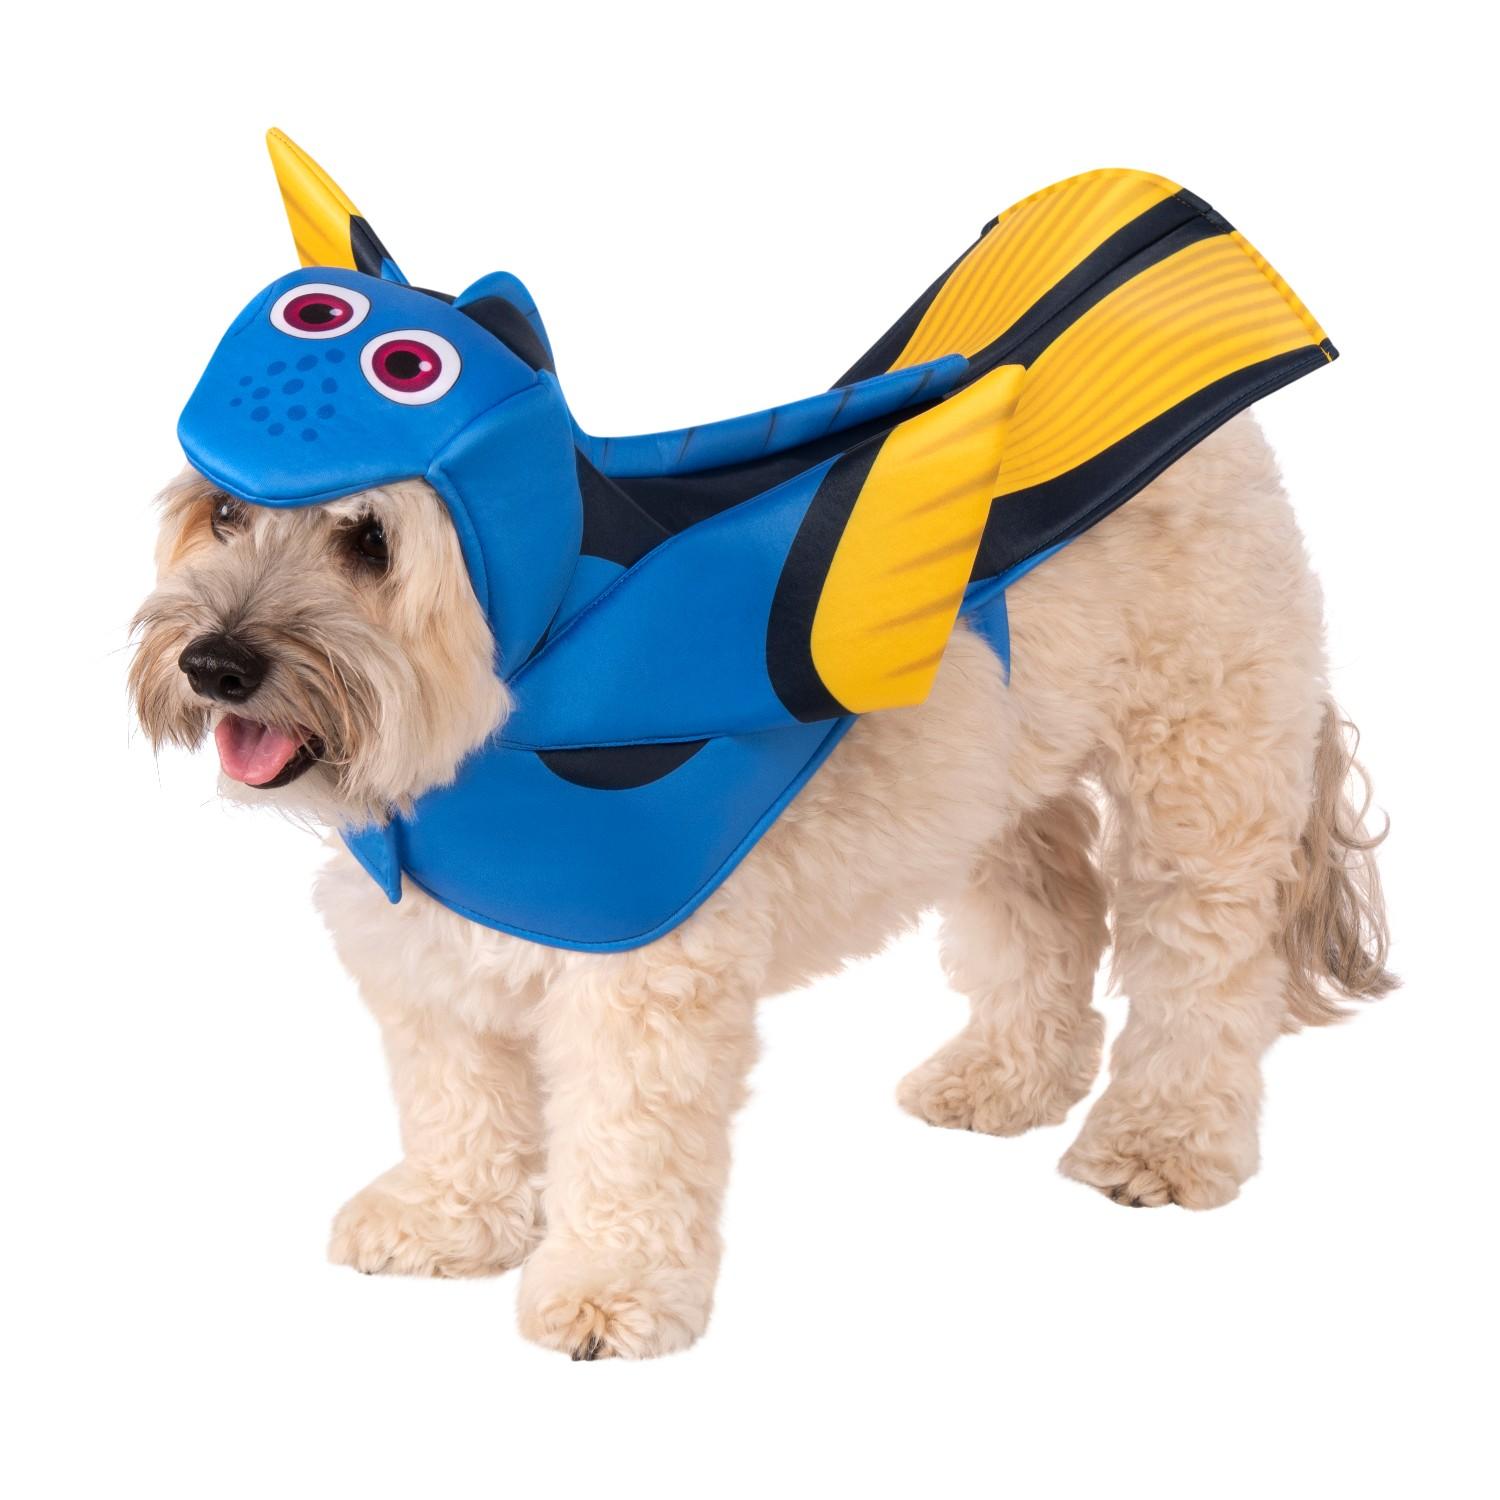 Finding Nemo's Dory Dog Costume by Rubies